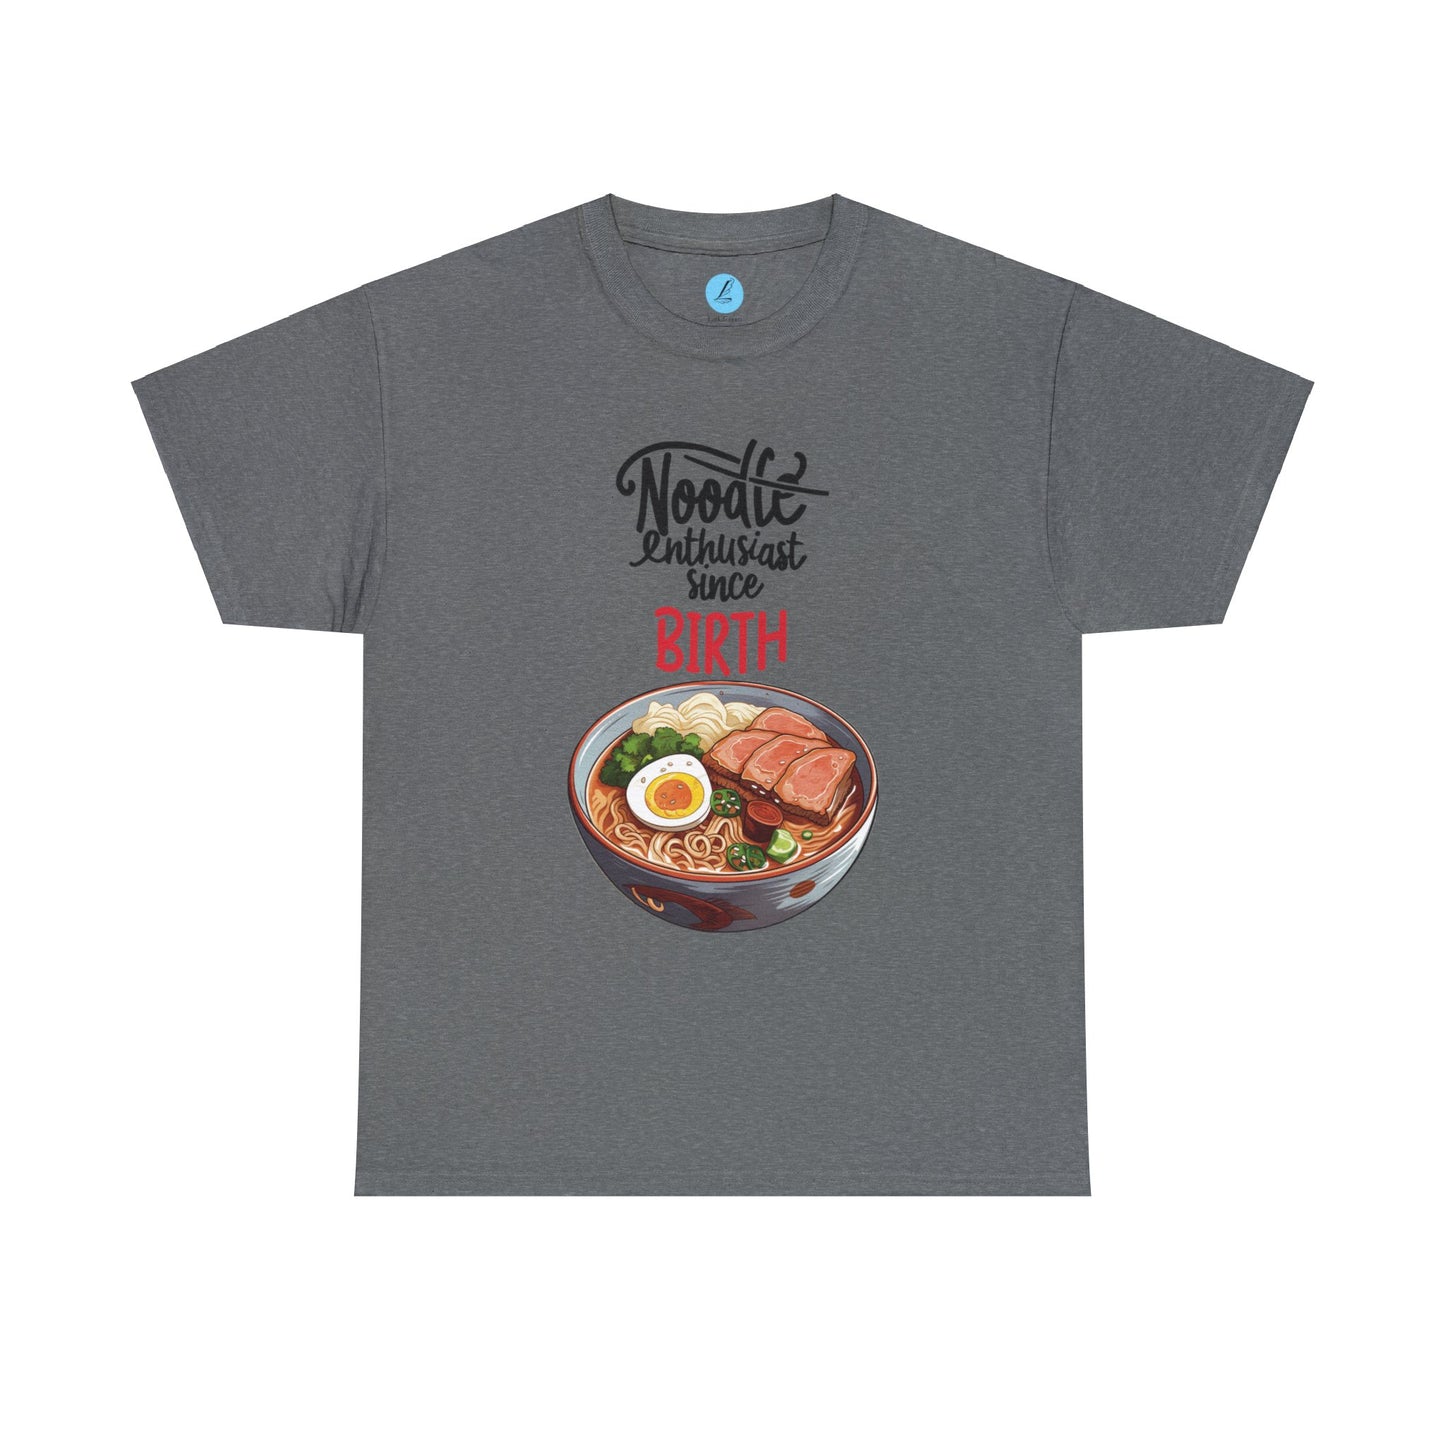 Noodle Enthusiast Since Birth Unisex Heavy Cotton Tee